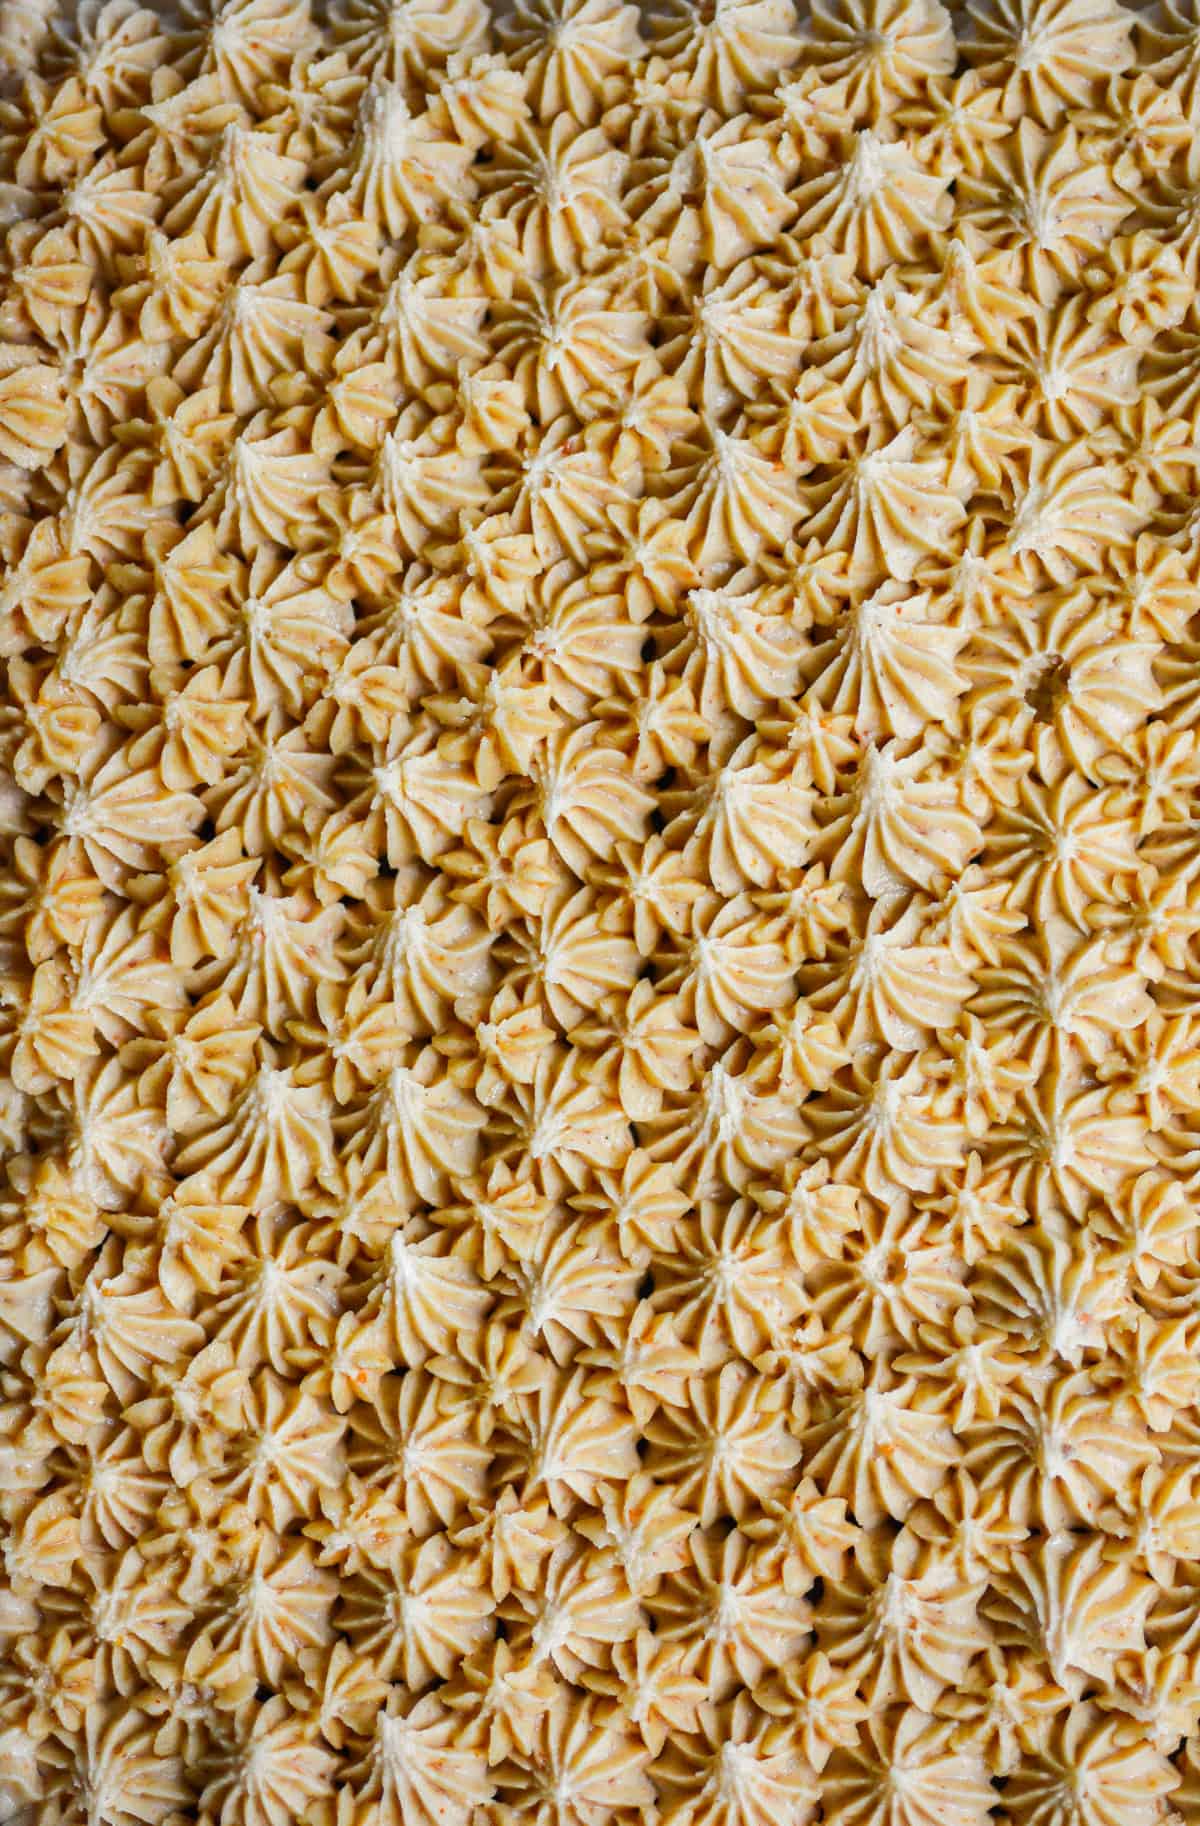 Peanut butter frosting decorations